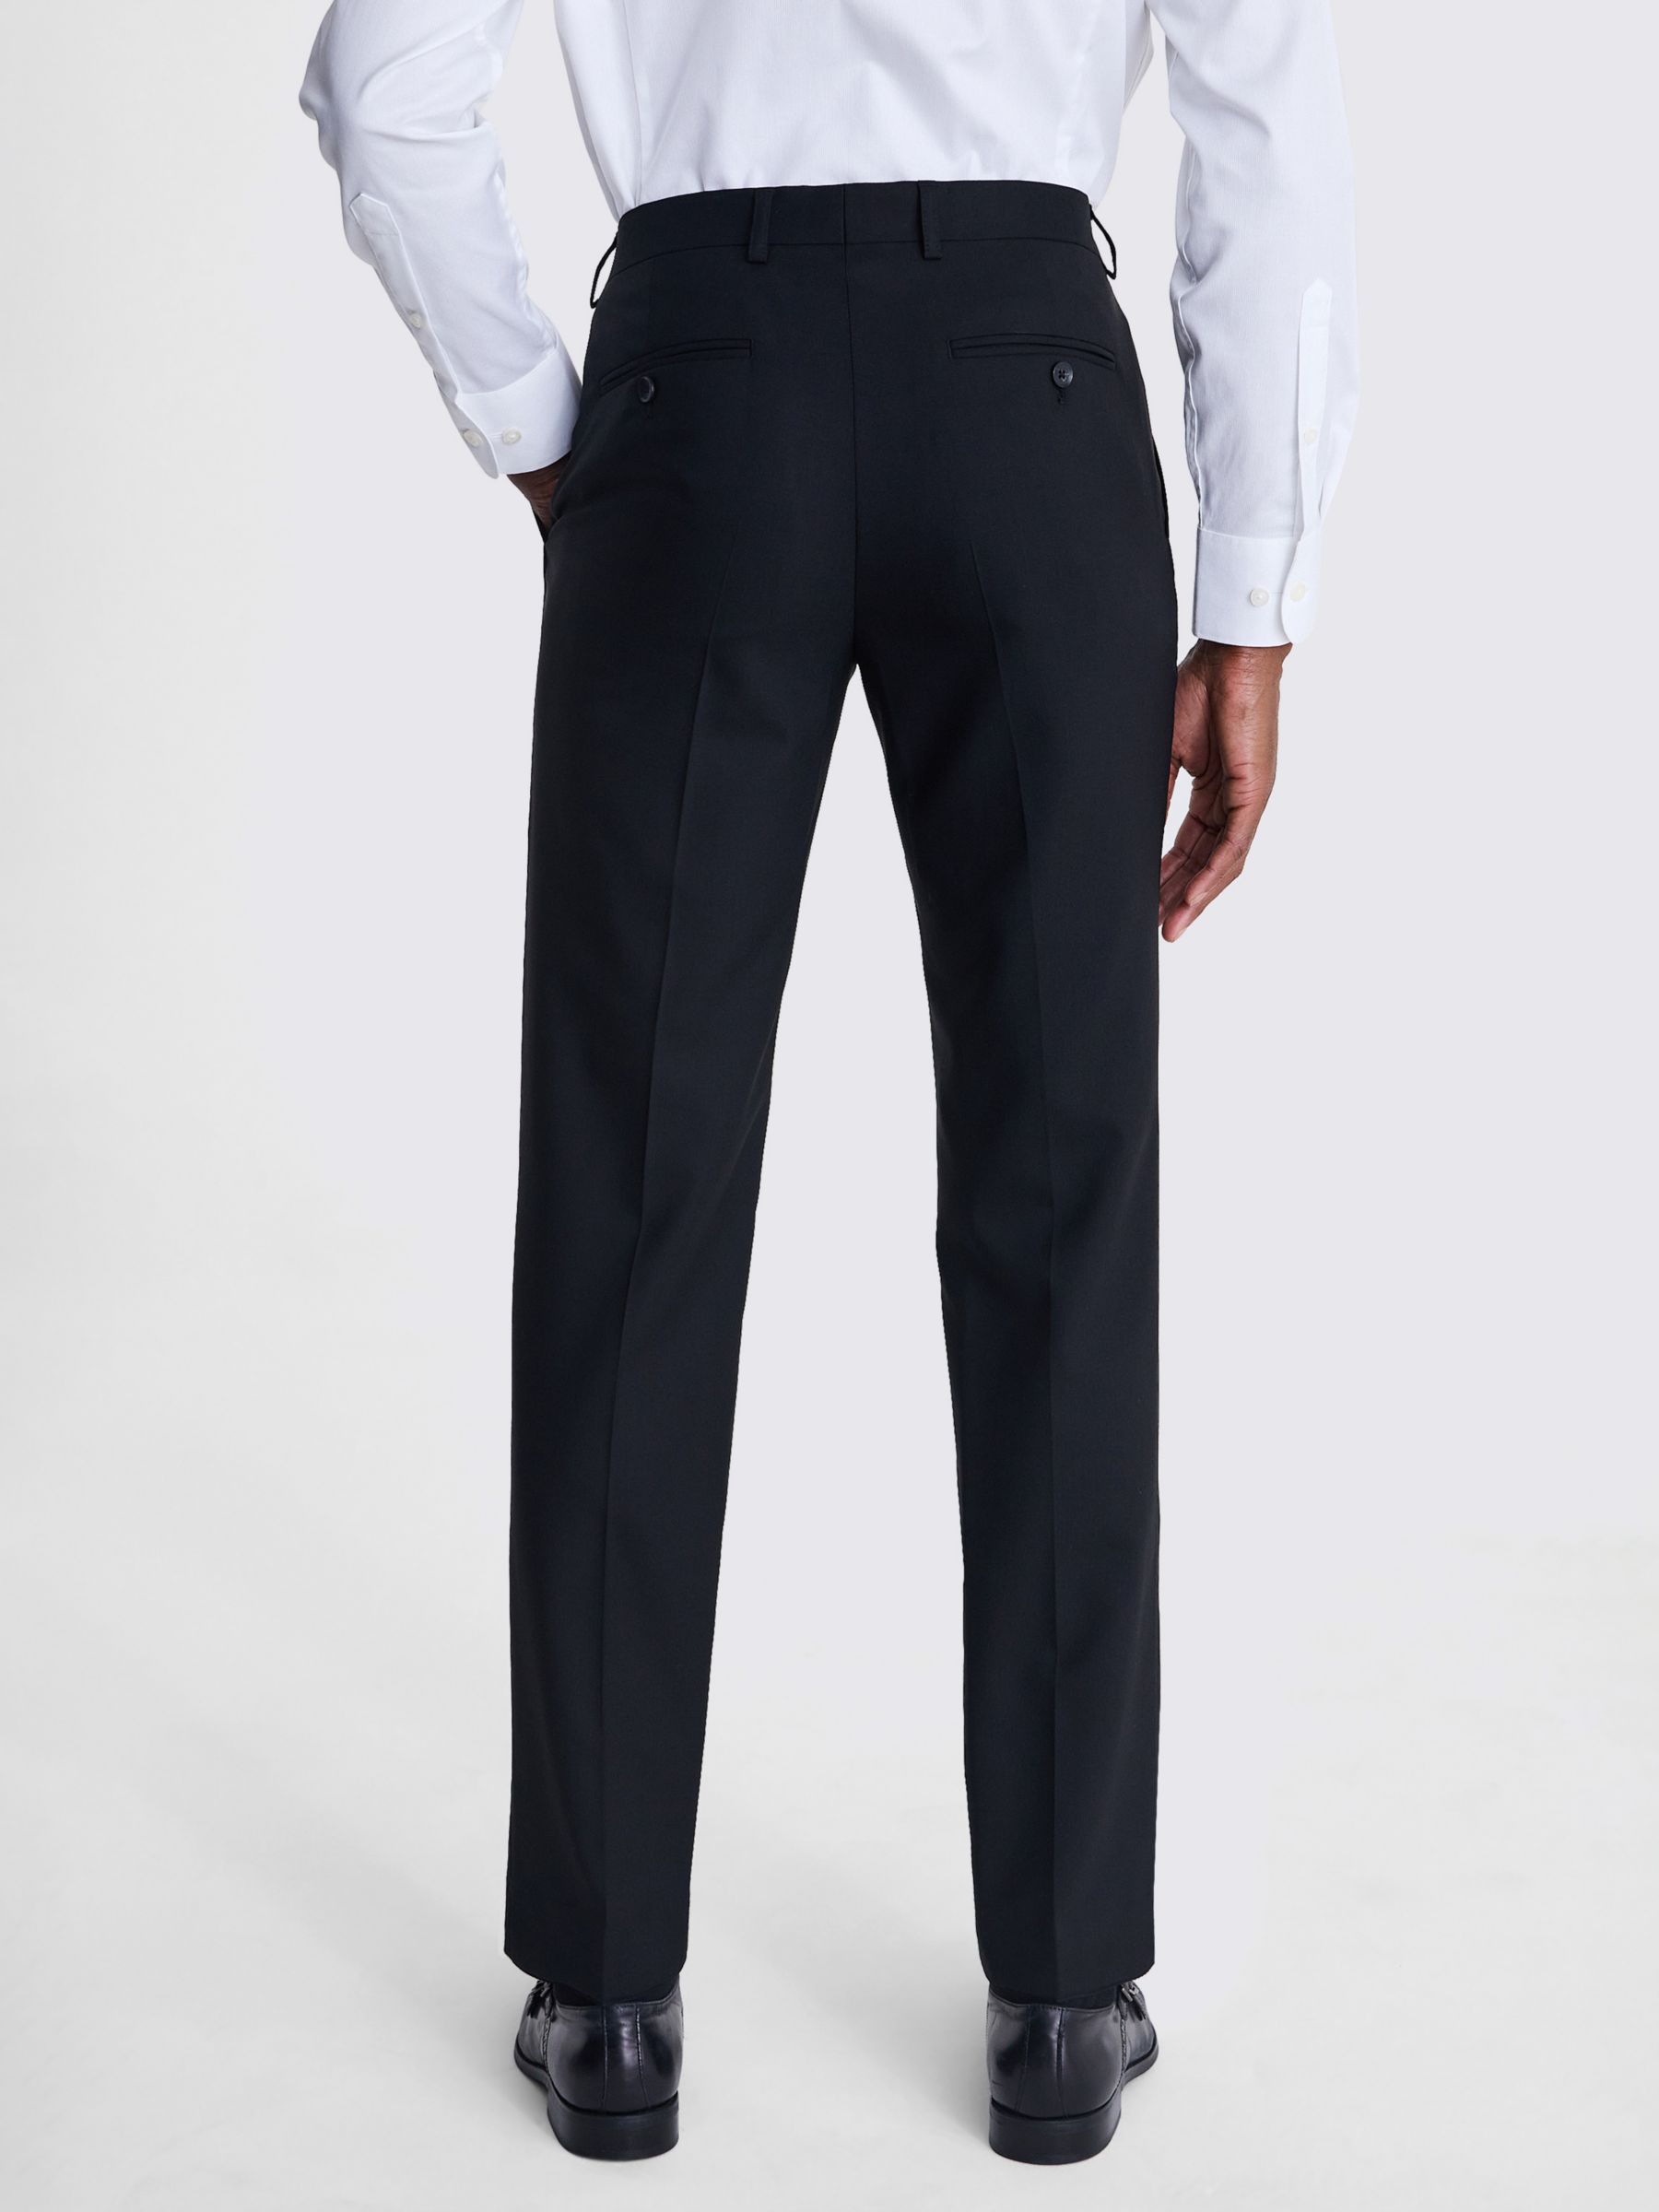 Buy Moss x Barberis Italian Tailored Fit Half Lined Trousers, Black Online at johnlewis.com